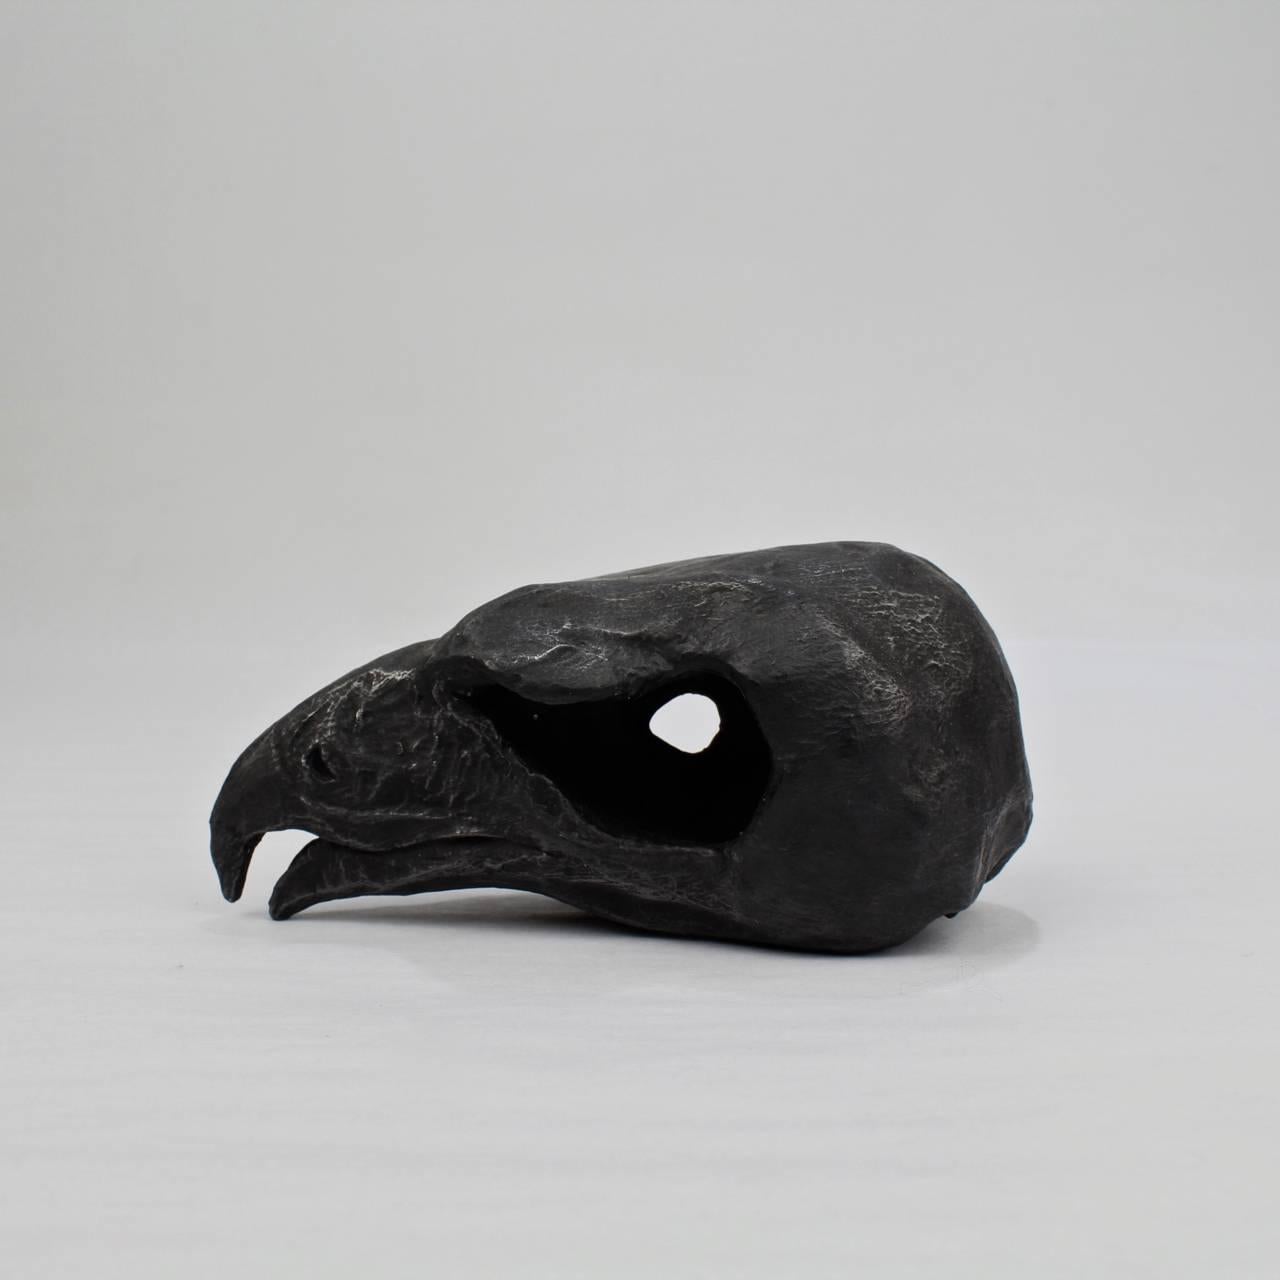 Title: Untitled.

A unique black painted terracotta sculpture of a hawk's skull by Darla Jackson.

Date: 2016.

Length: circa 4 in.

Signed to the base D. Jackson.

Darla Jackson was born in Pennsylvania in 1981. She received a BFA in